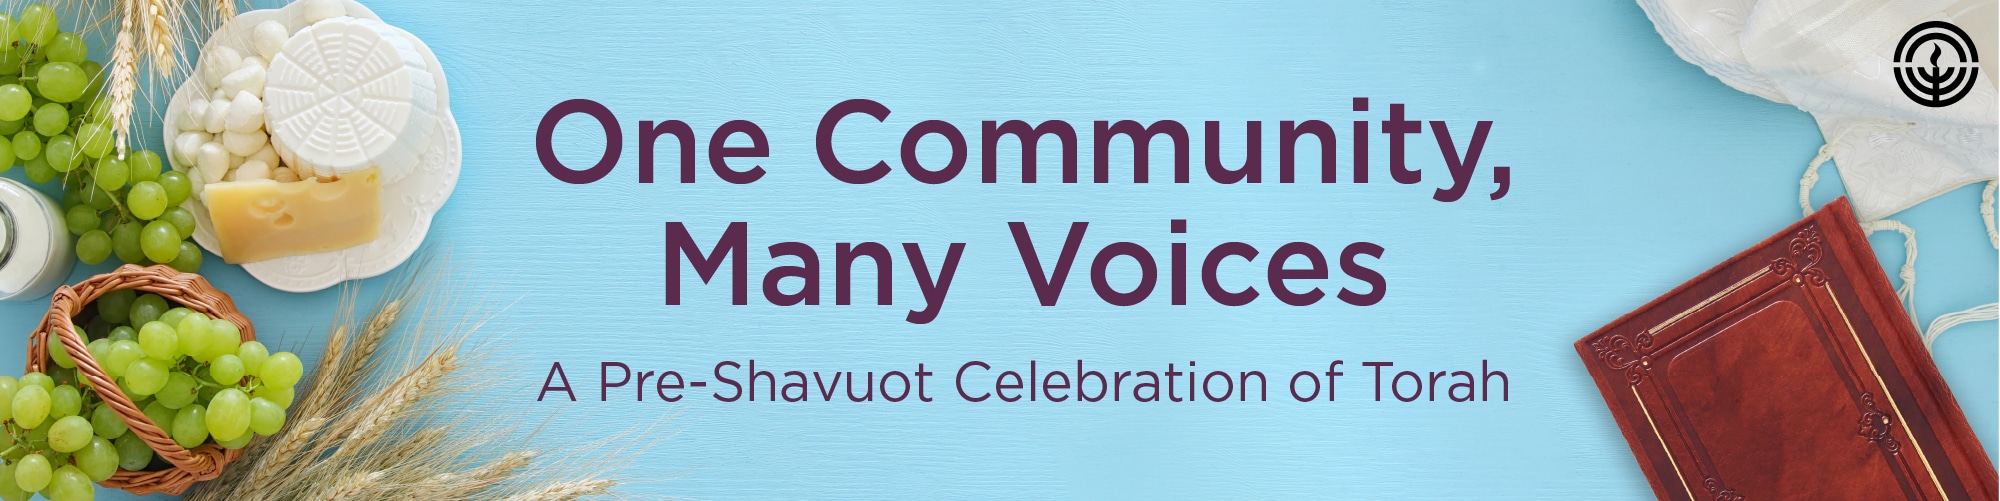 One Community. Many Voices Banner with cheese and Jewish book.